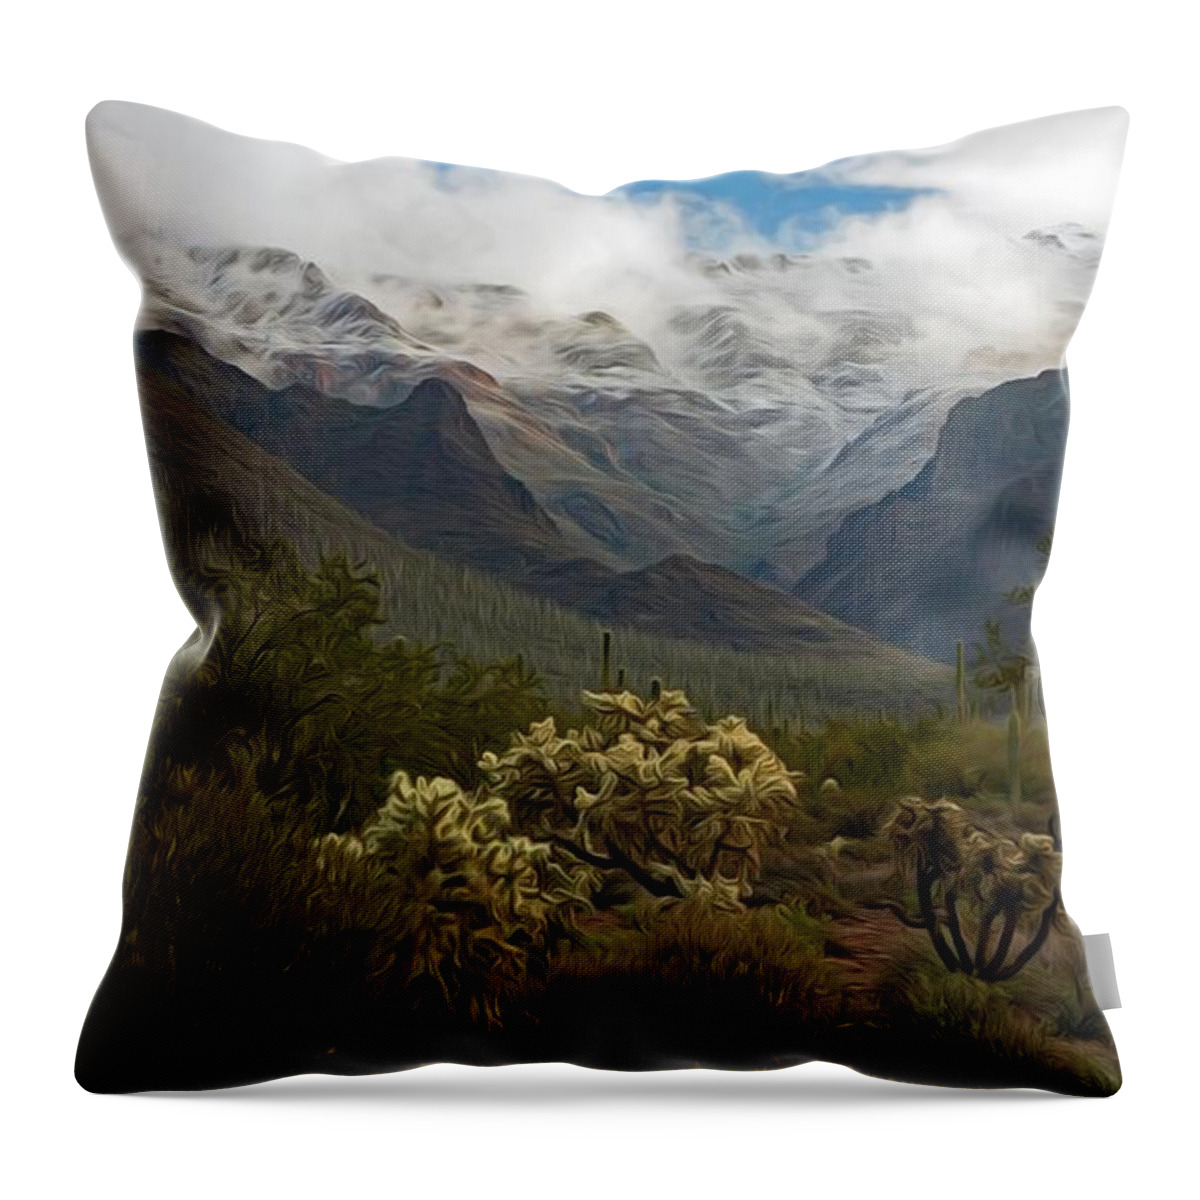 Landscape Throw Pillow featuring the photograph Misty Mountain Morning by Hans Brakob